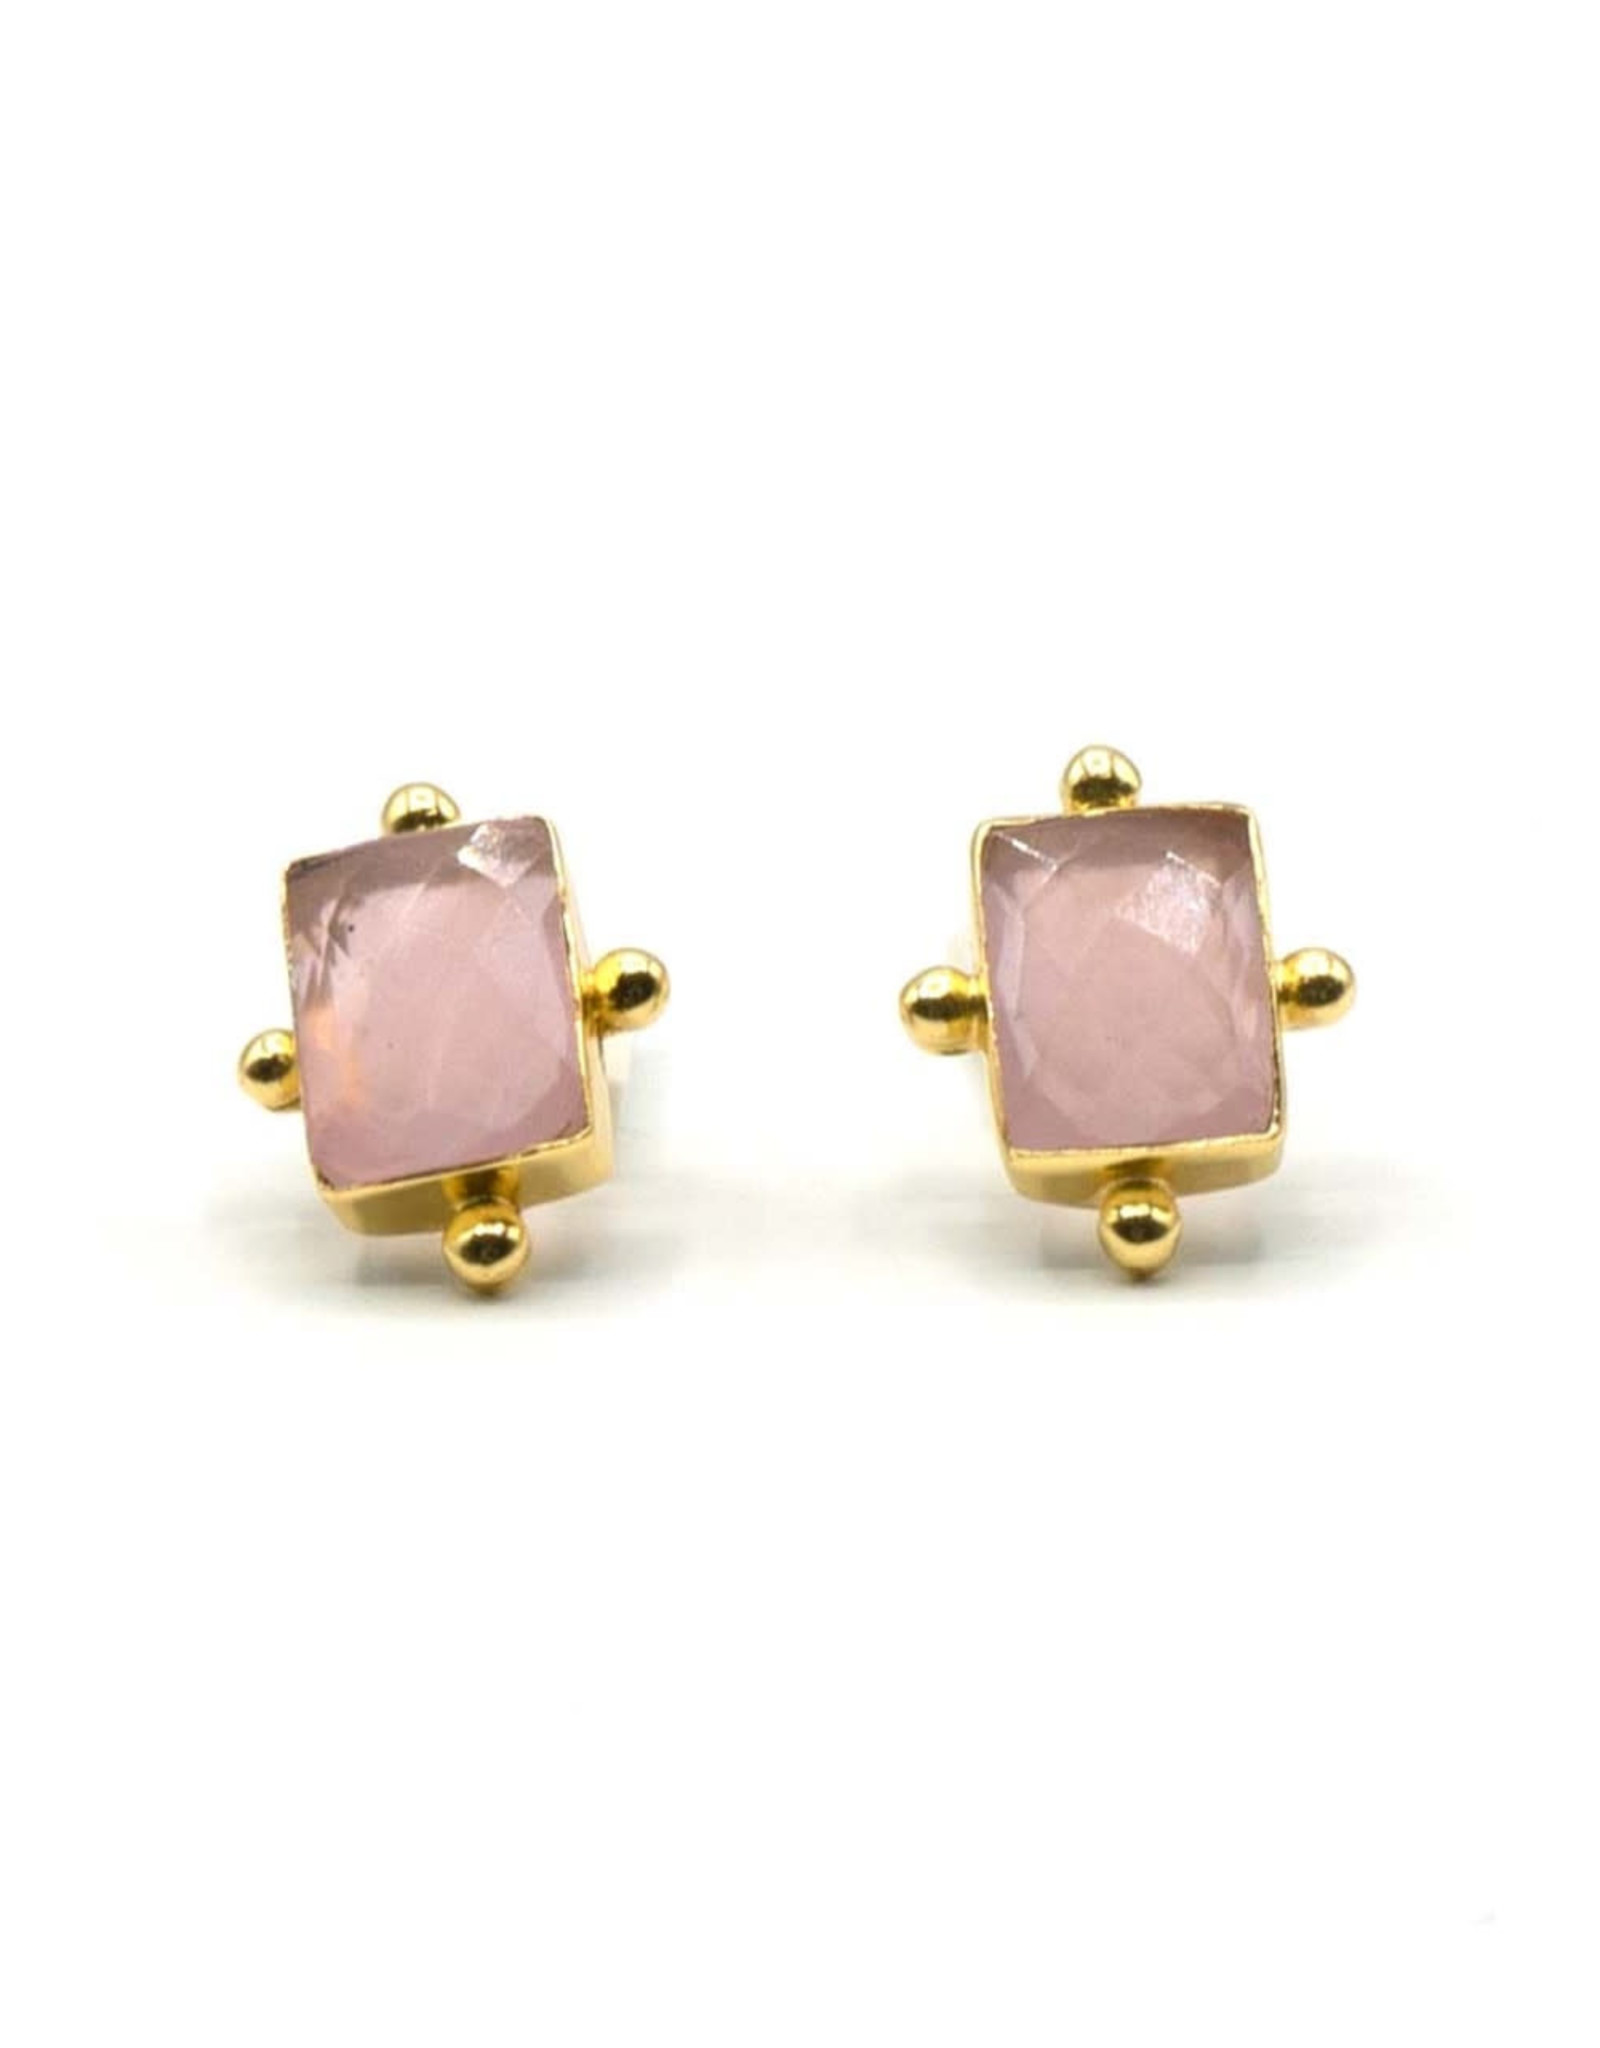 India CLEARANCE Blush & Brass Stud Earrings, India